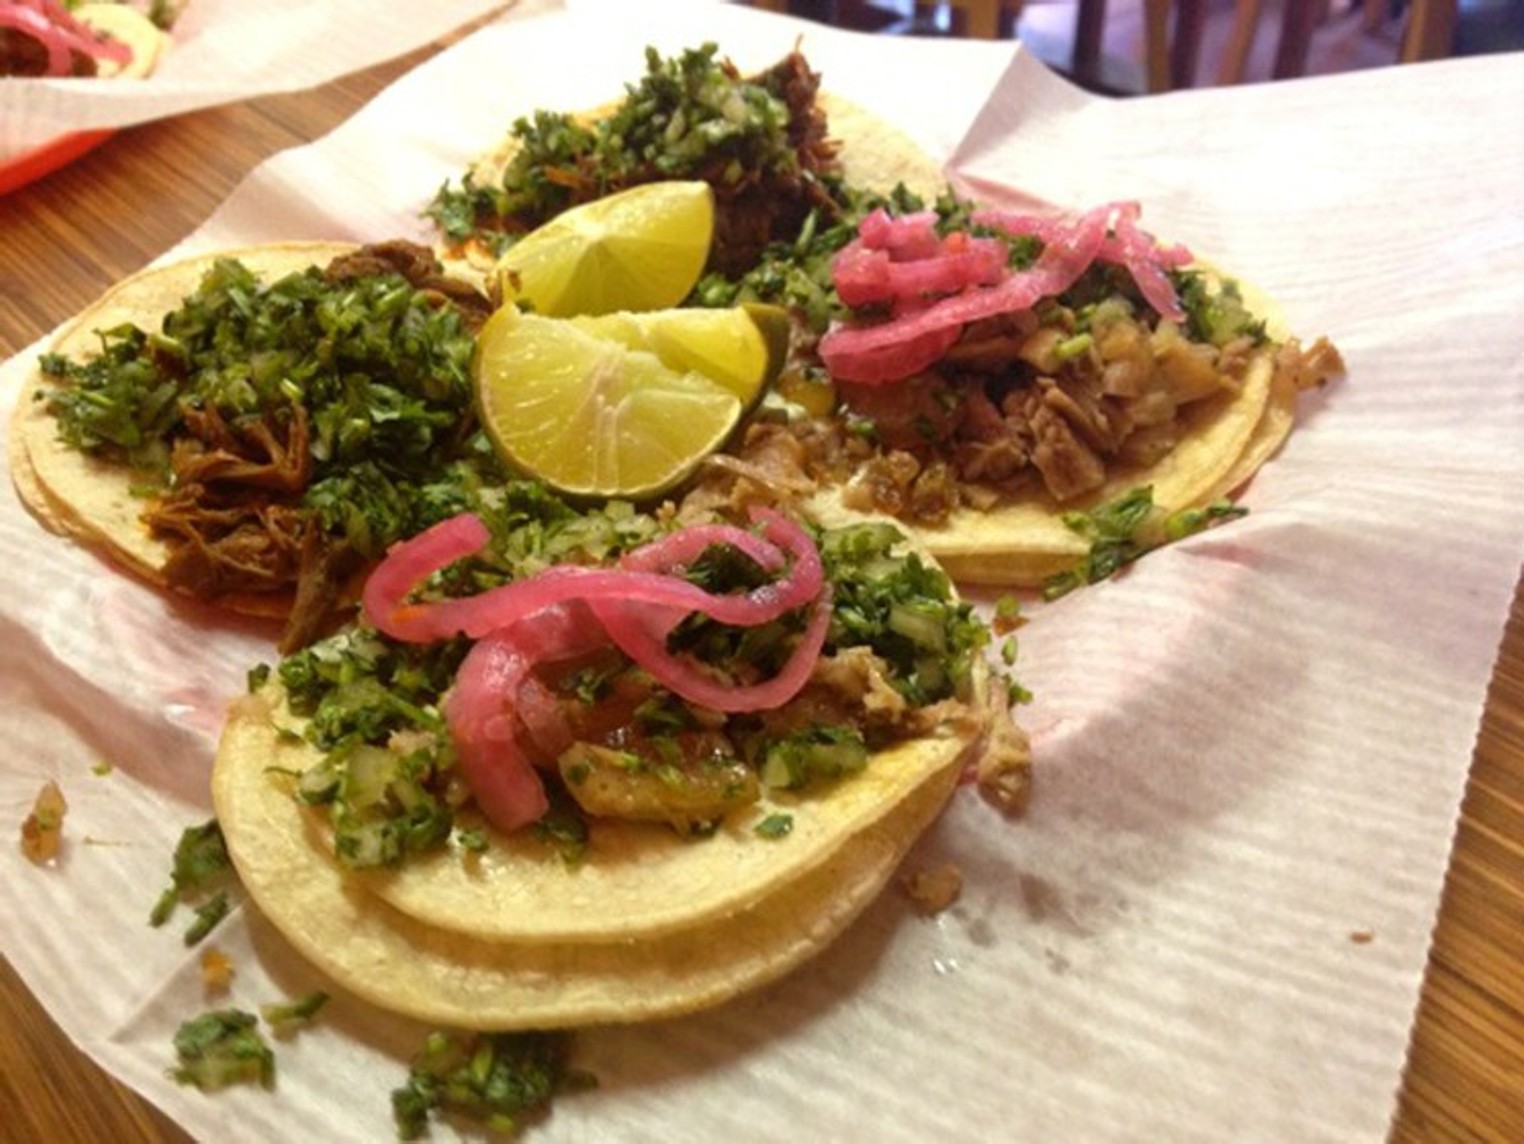 Best Tacos 2019 La Calle Taqueria y Carnitas Best of Denver® Best Restaurants, Bars, Clubs, Music and Stores in Denver Westword picture